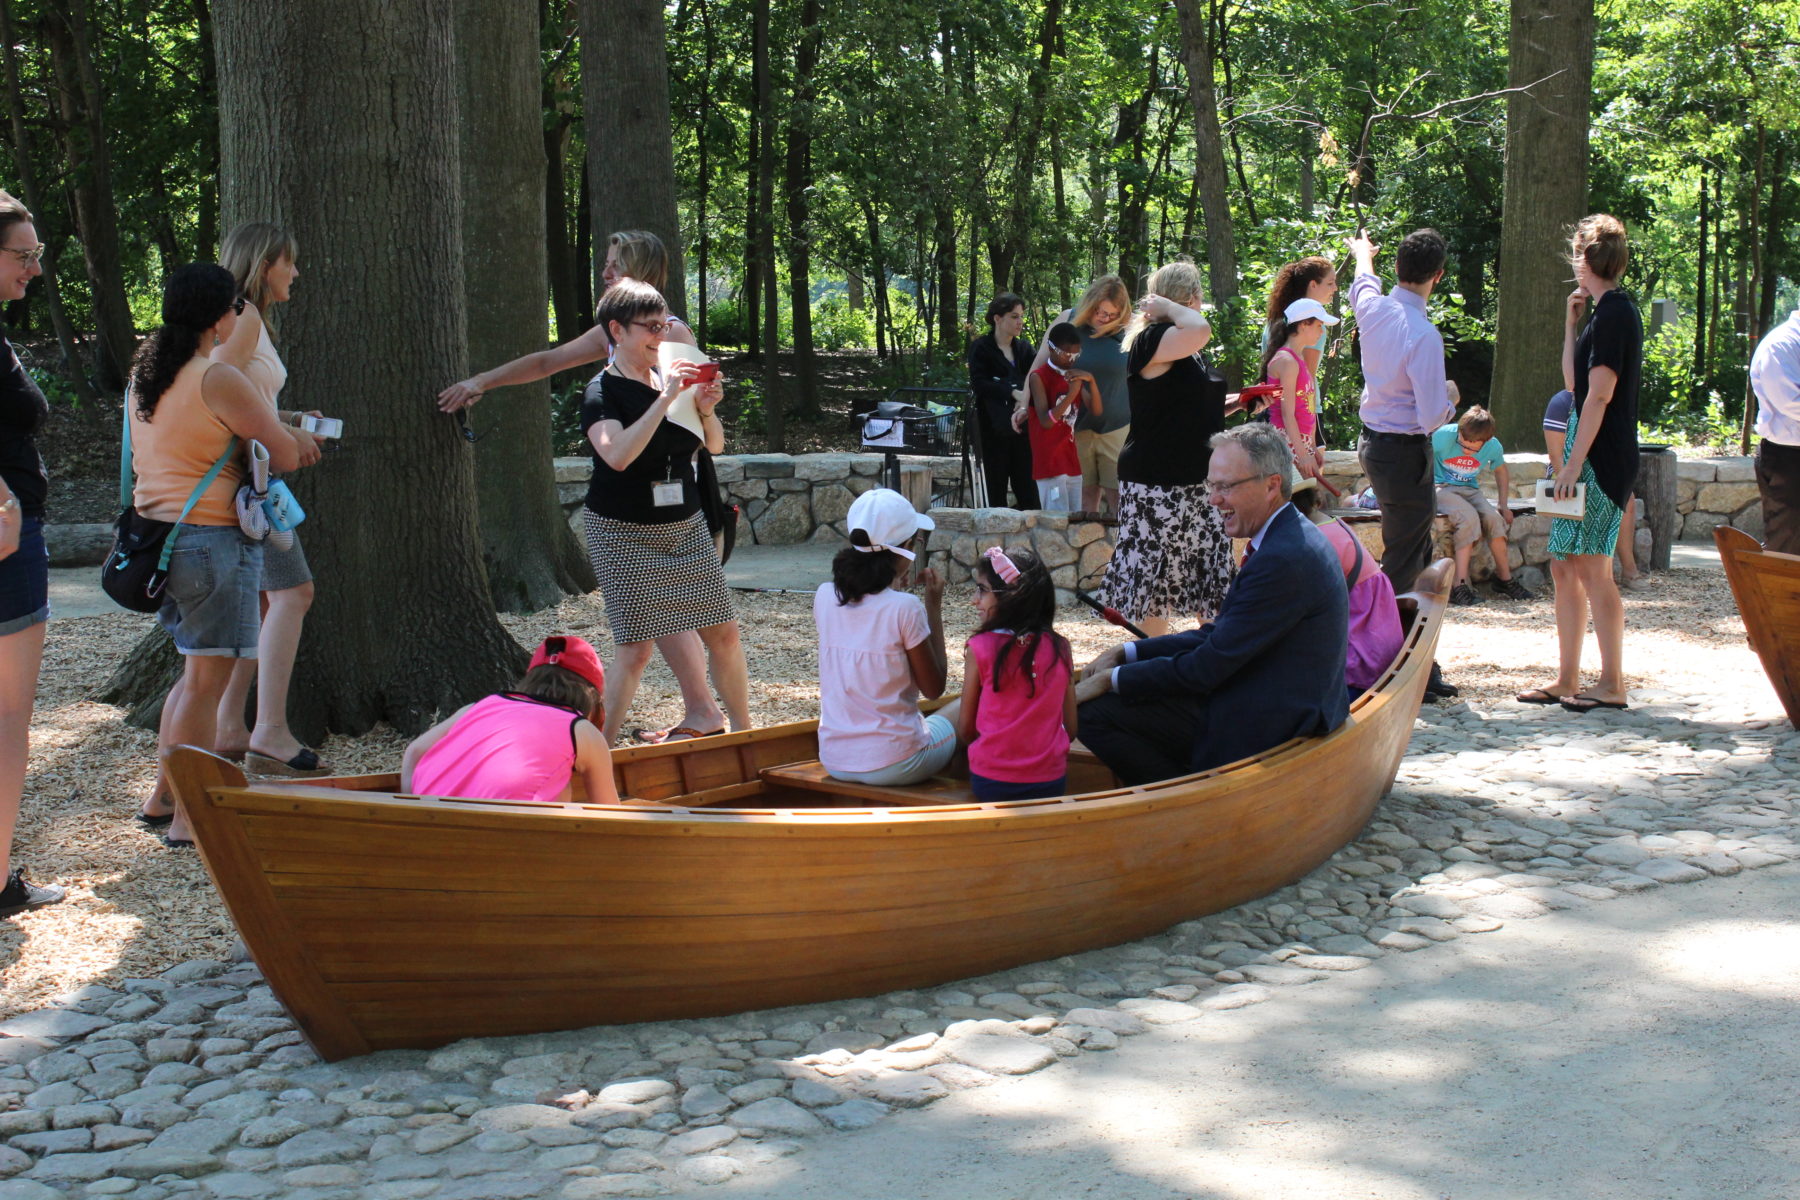 People playing in wooden boat